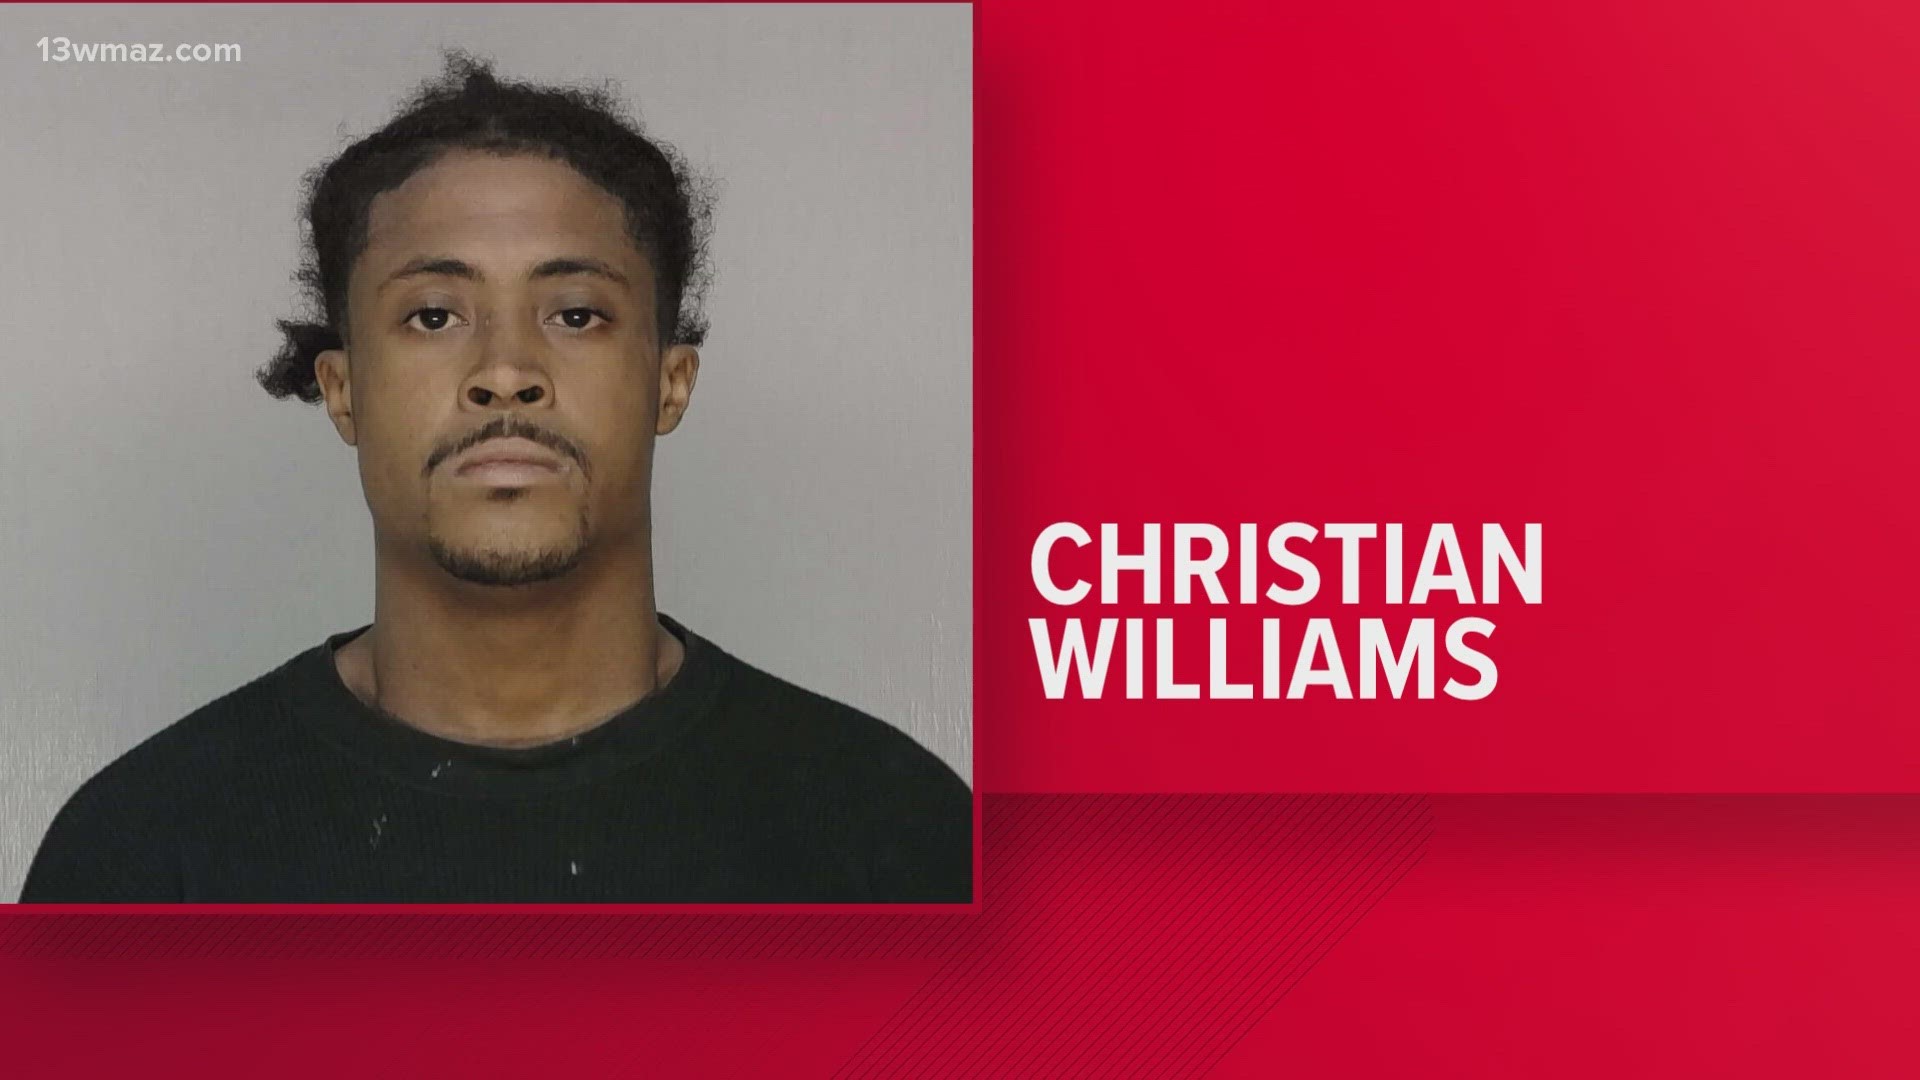 Christian Williams was supposed to go on trial for murder back in March. But a video appeared to show him being kidnapped from his home in the early hours of March 6